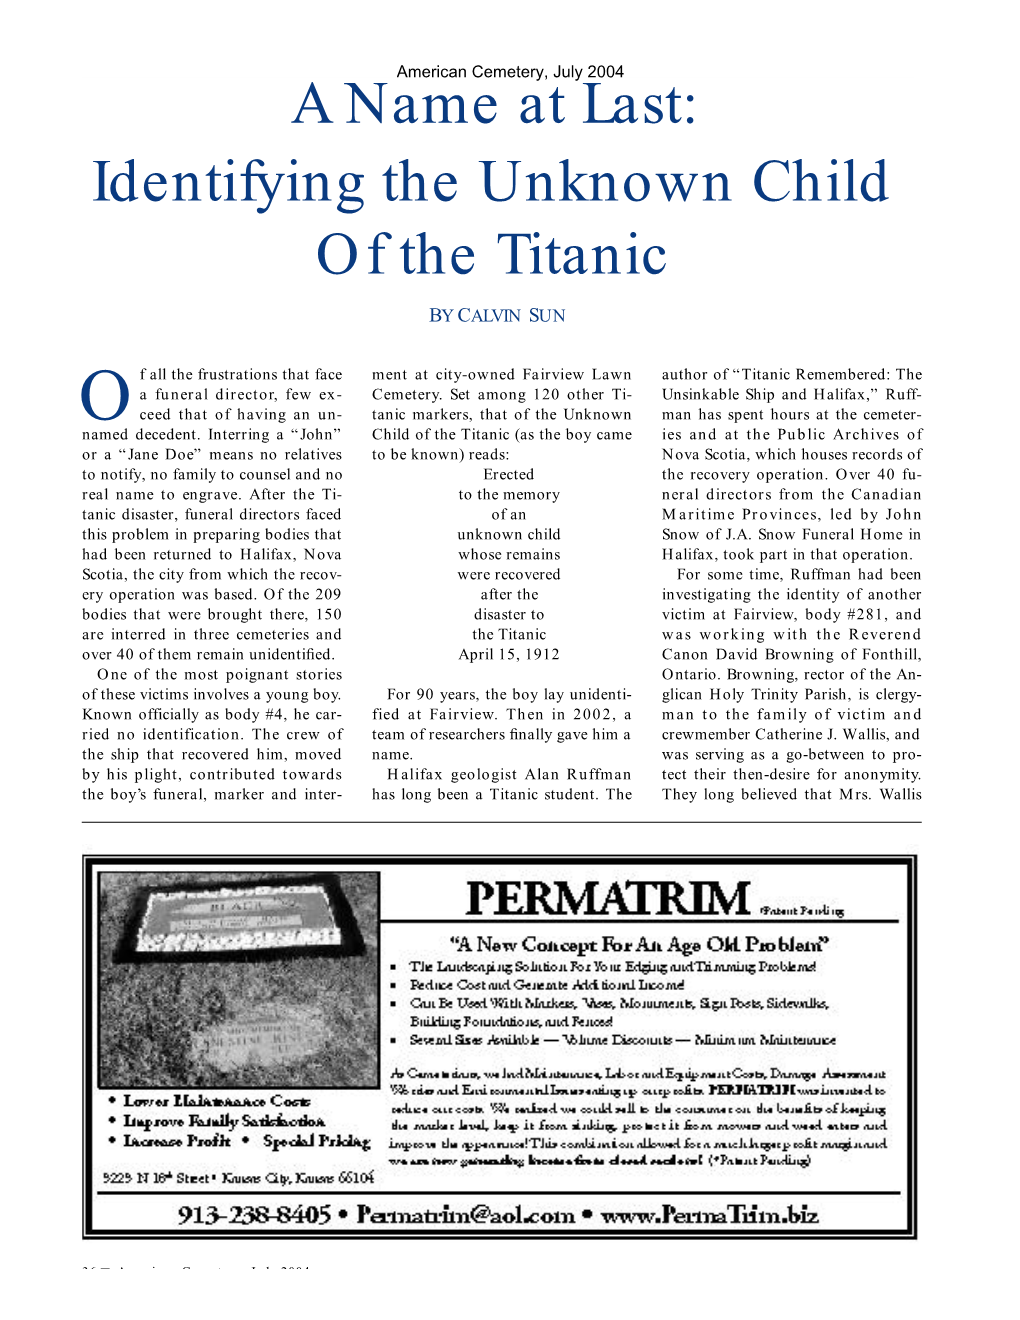 A Name at Last: Identifying the Unknown Child of the Titanic